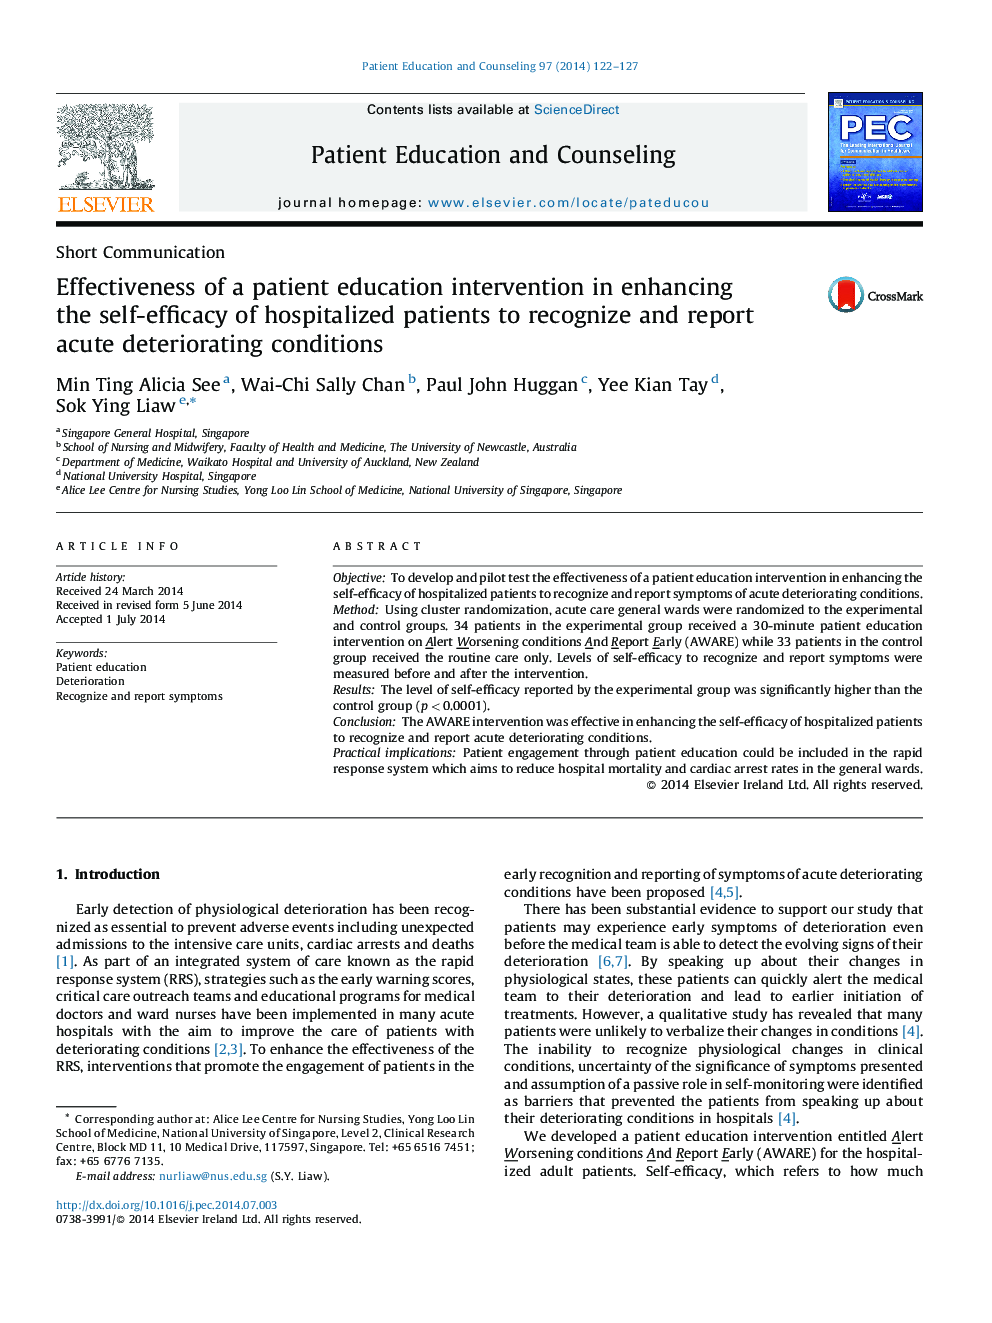 Effectiveness of a patient education intervention in enhancing the self-efficacy of hospitalized patients to recognize and report acute deteriorating conditions